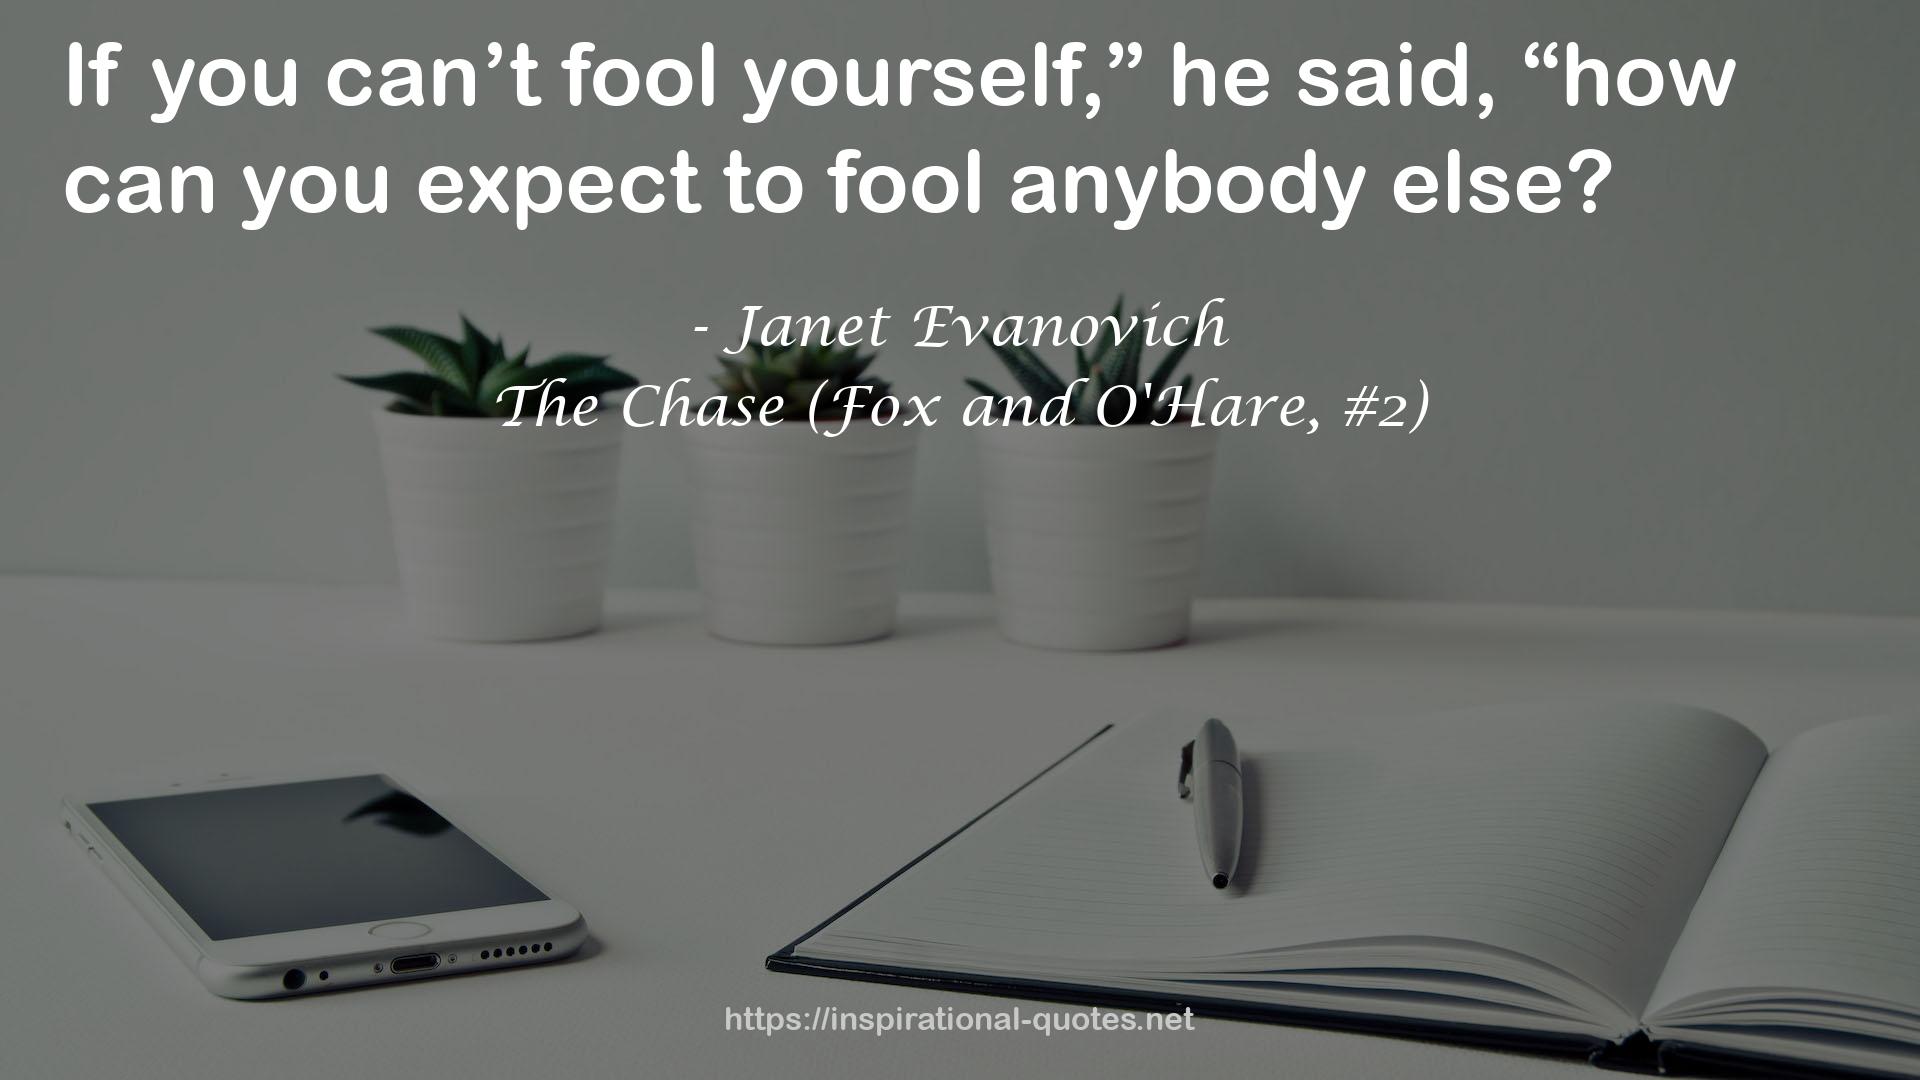 The Chase (Fox and O'Hare, #2) QUOTES